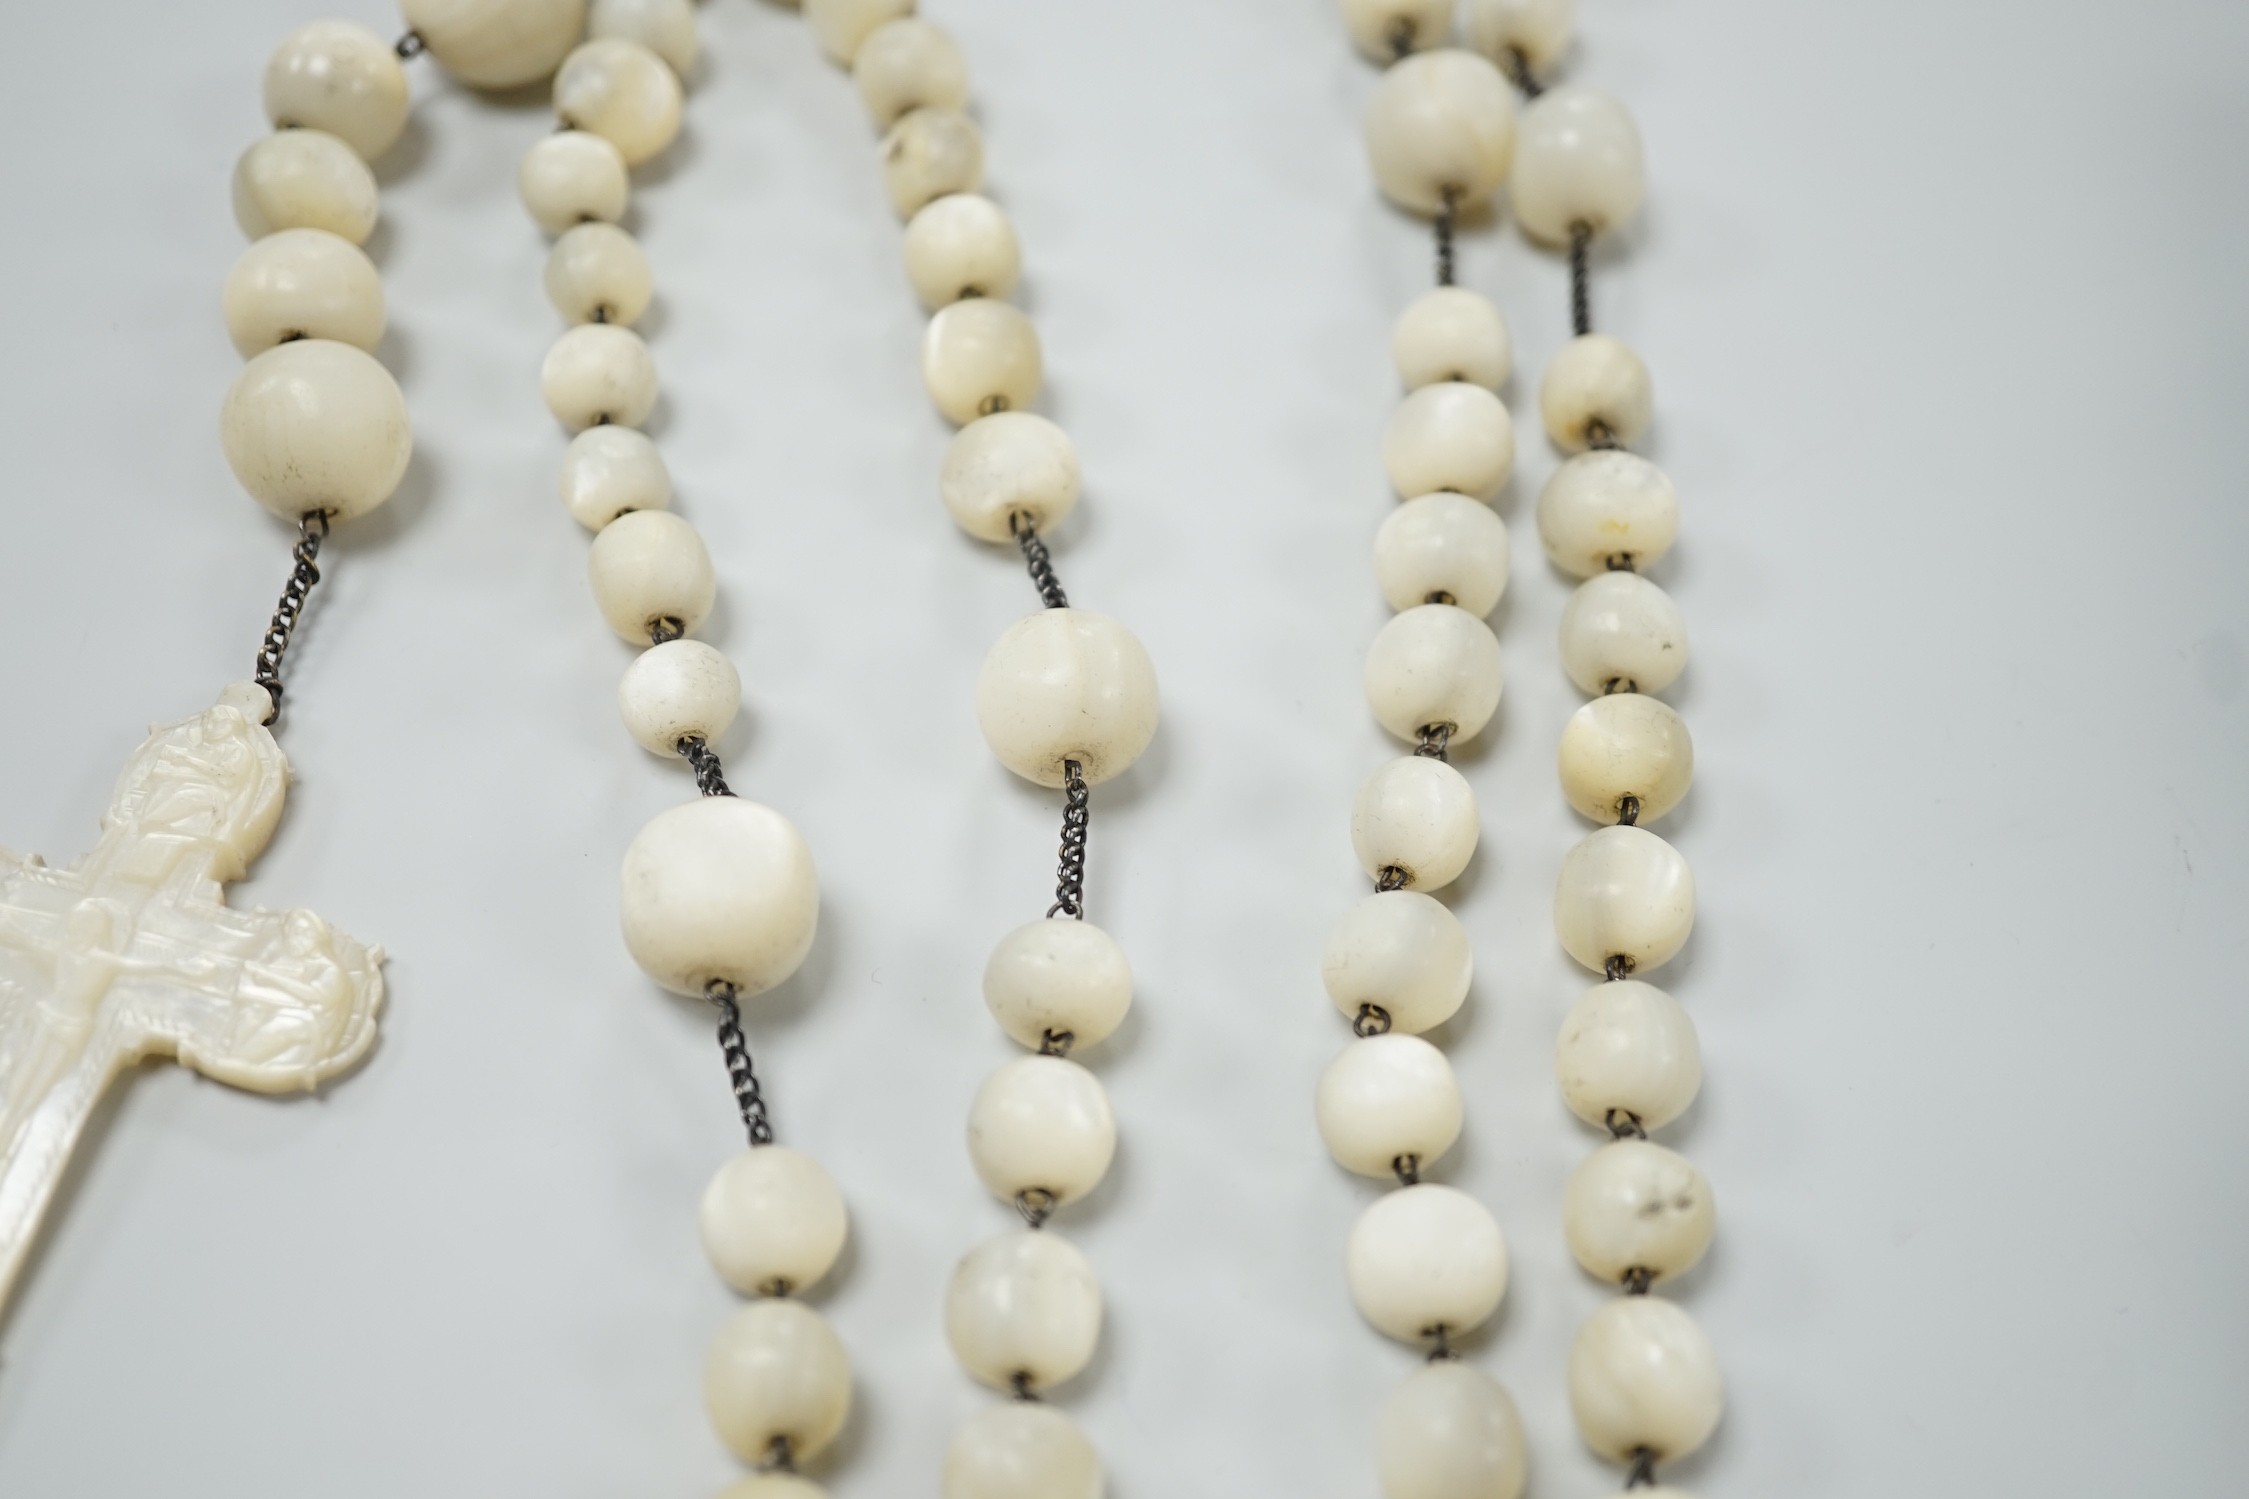 A long mother of pearl multi bead necklace, 158cm, with carved mother of pearl crucifix pendant, - Image 7 of 8